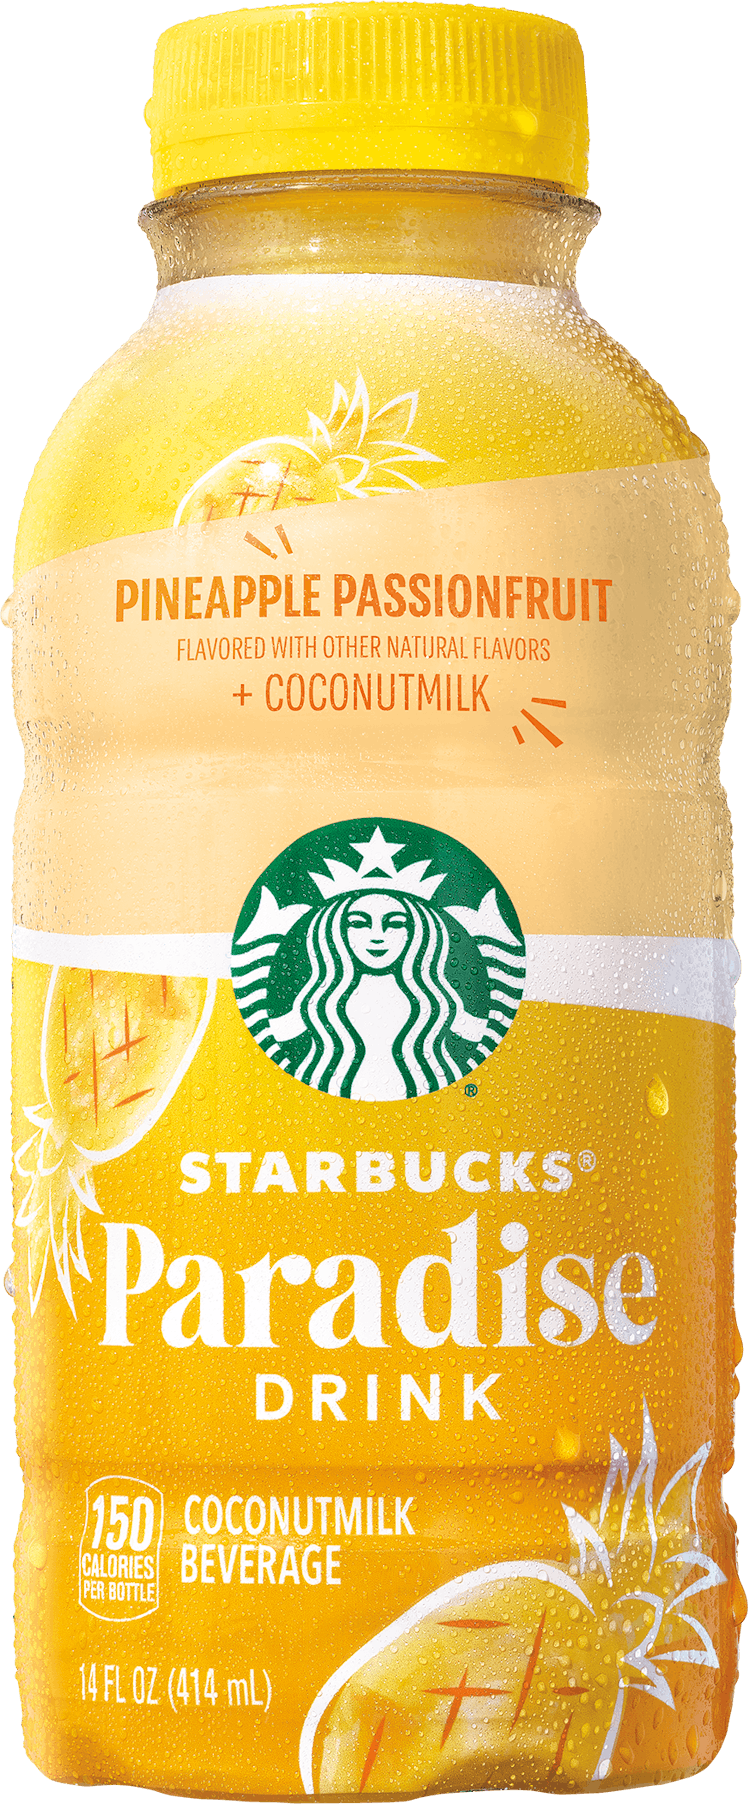 The Paradise Drink from Starbucks is now available at Target and grocery stores. 